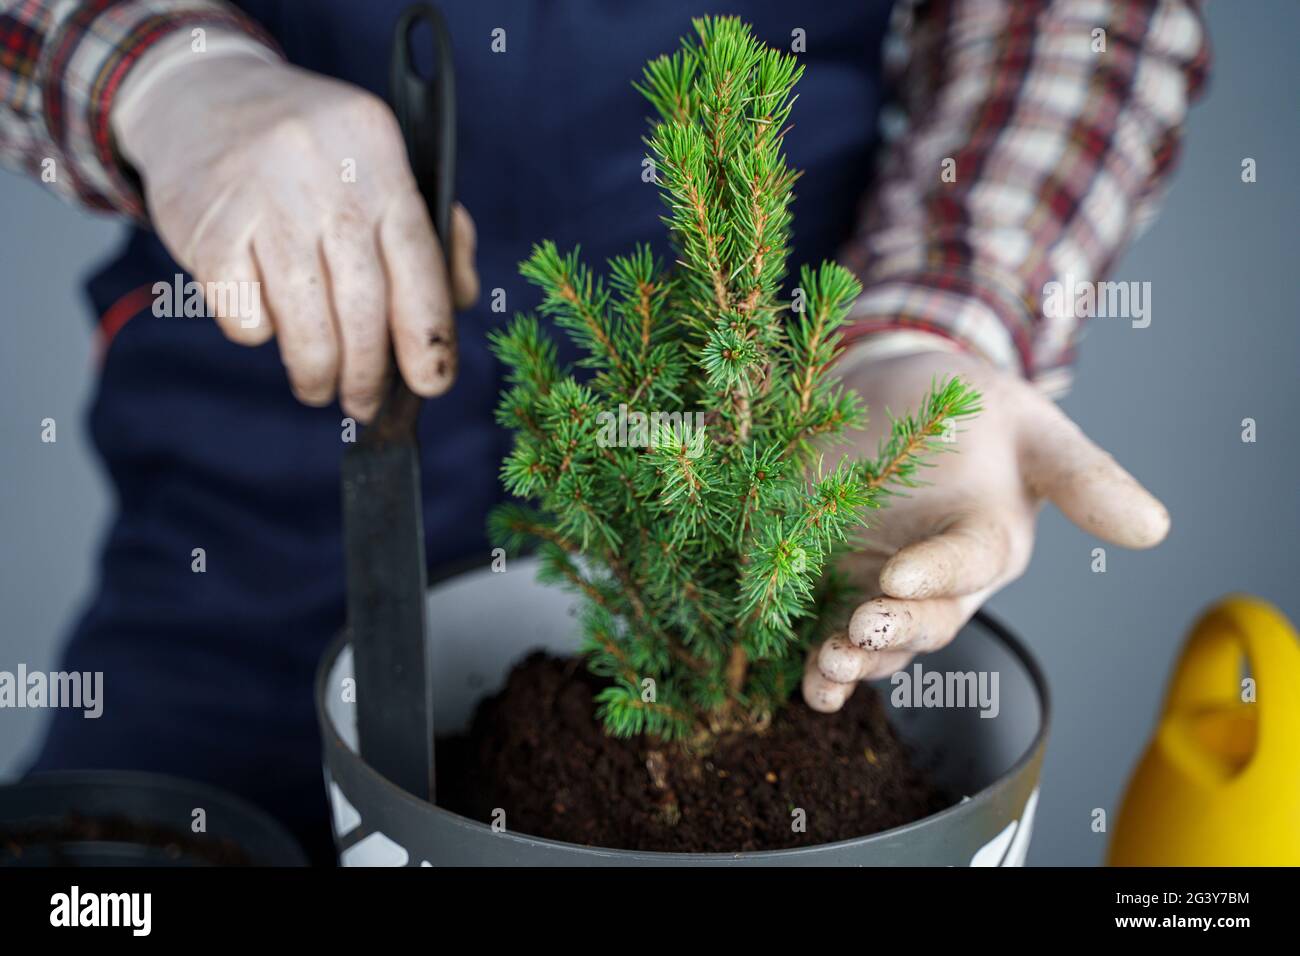 Transplanting indoor plants. Home gardening. Plant care. Man transplants spruce plants from old pot to new one. Cropped view of Stock Photo